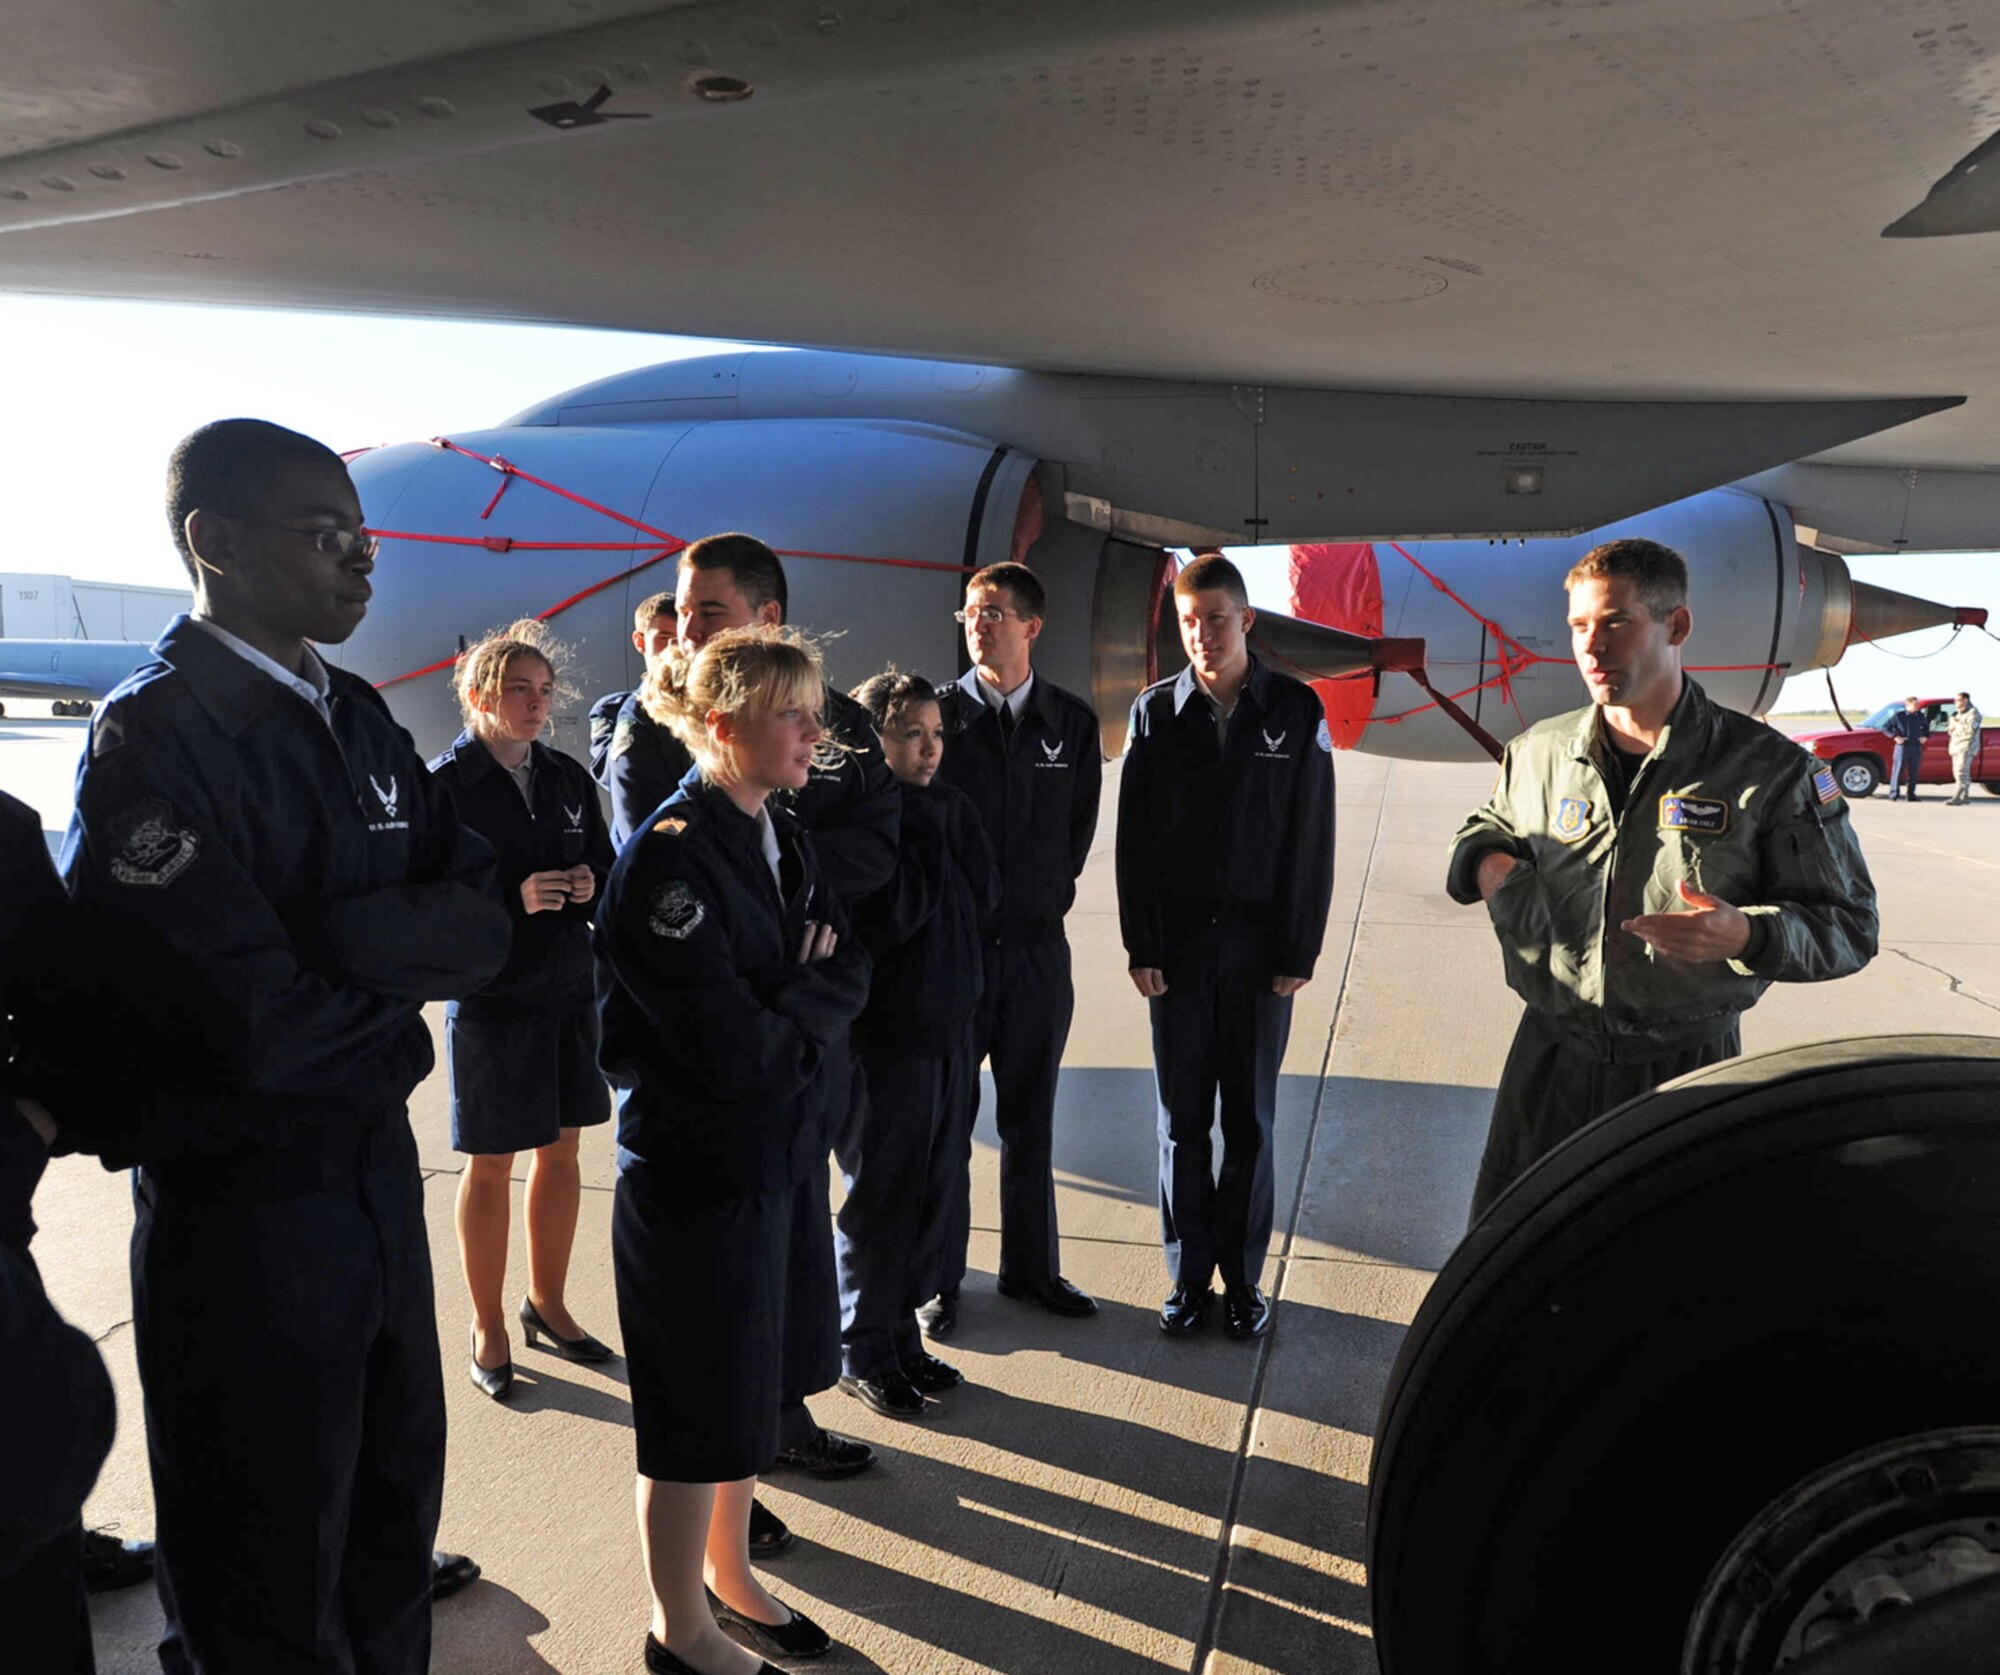 1st Lt. Brian Cole guides Air Force Junior Reserve Officer Training Corps cadets on an early morning tour around the outside of a KC-135 Stratotanker at McConnell Air Force Base, Kan. The cadets' school, Derby High School in Derby, Kan., is less than 10 miles from McConnell. Lieutenant Cole is a KC-135 pilot assigned to the 18th Air Refueling Squadron, the flying squadron of the 931st Air Refueling Group. The 931st is an Air Force Reserve Command unit assigned to McConnell. (U.S. Air Force photo/Tech. Sgt. Jason Schaap)